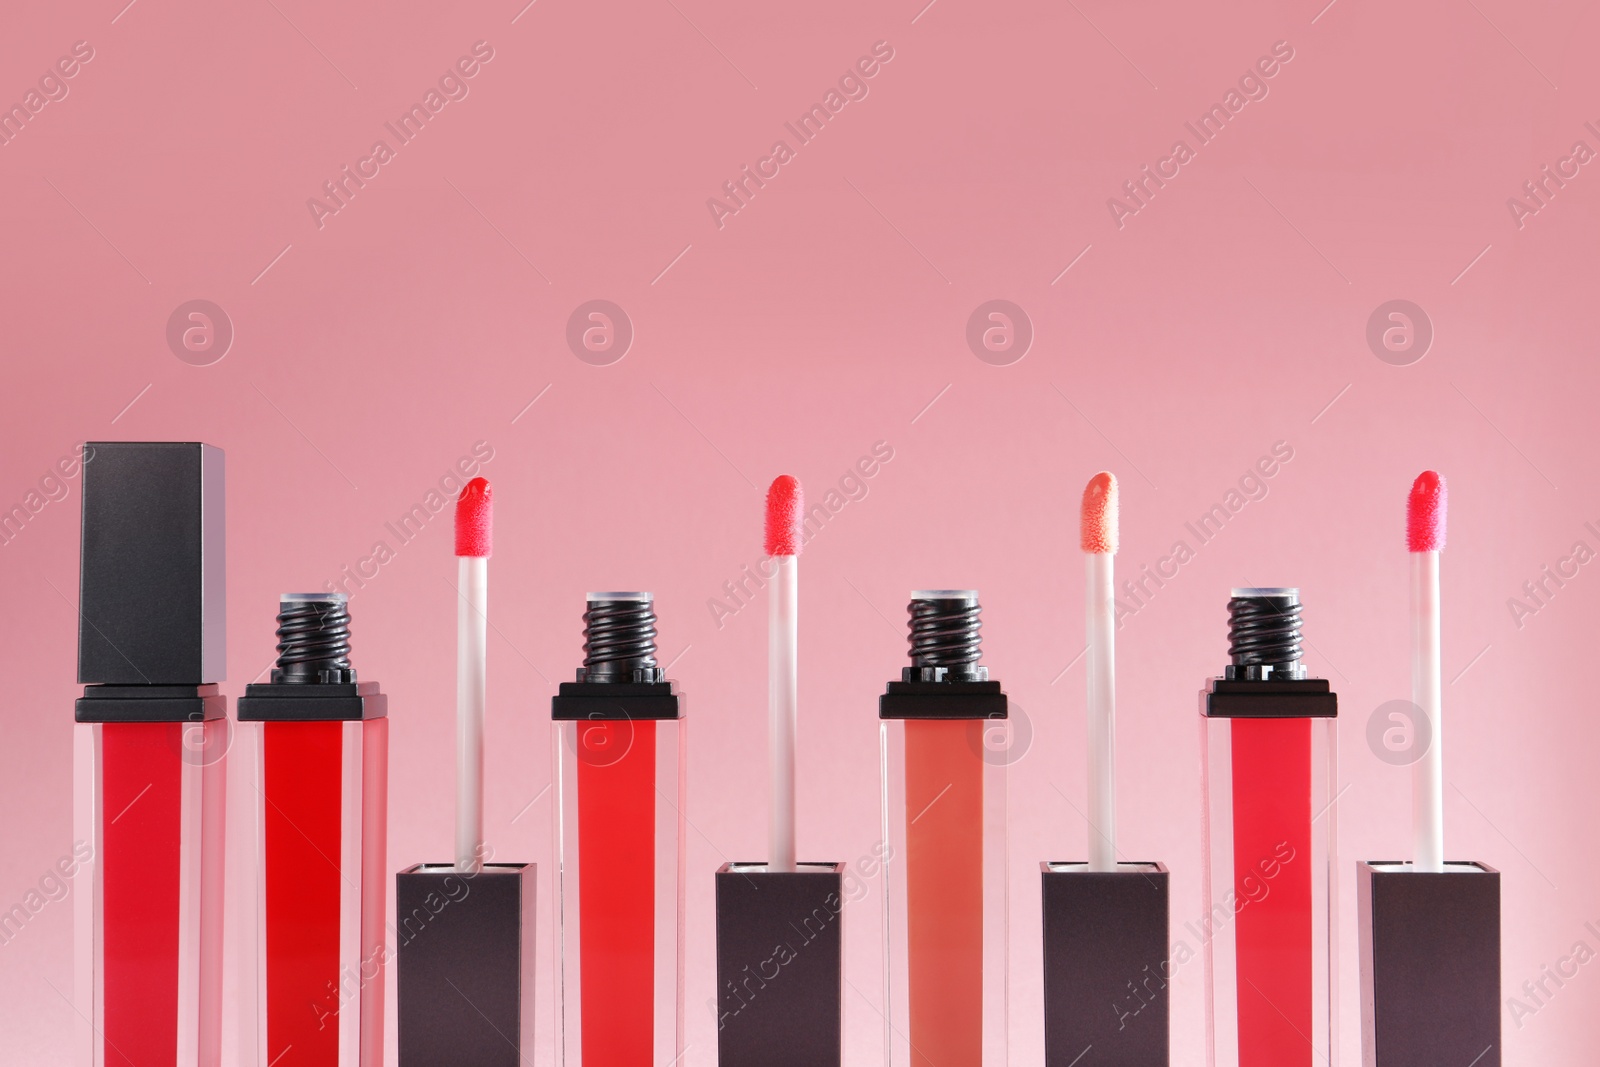 Photo of Liquid lipsticks with applicators on color background